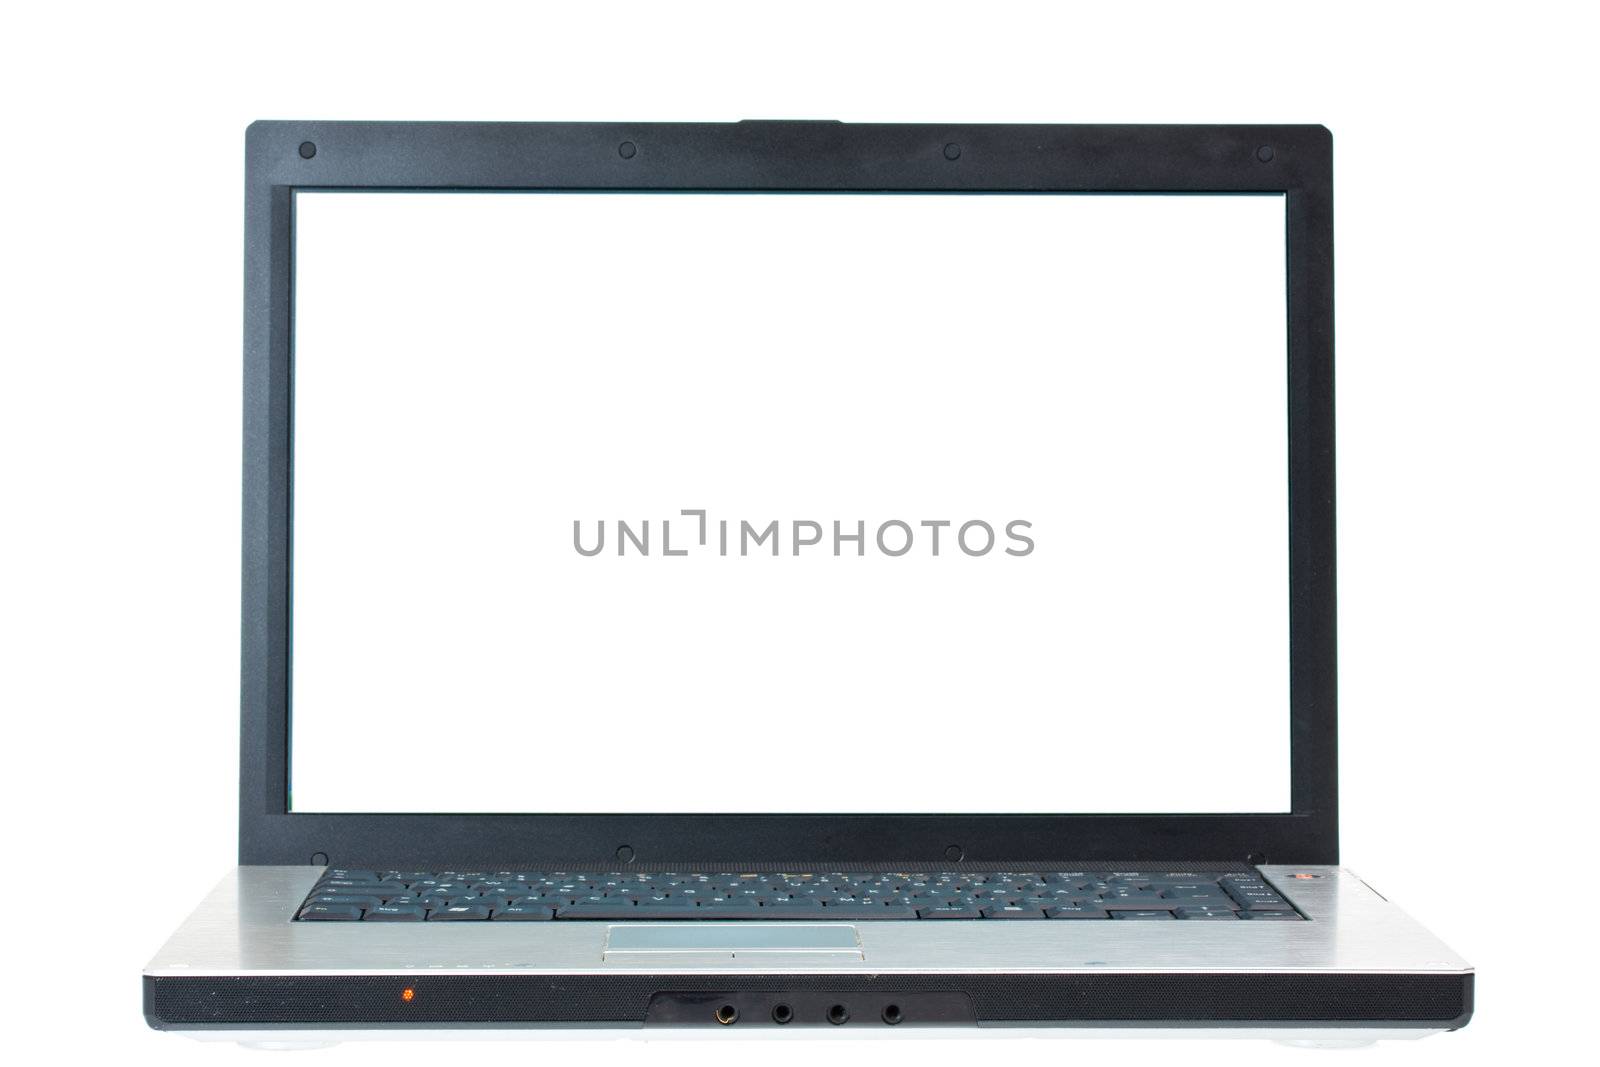 alloy notebook computer on white background by bernjuer